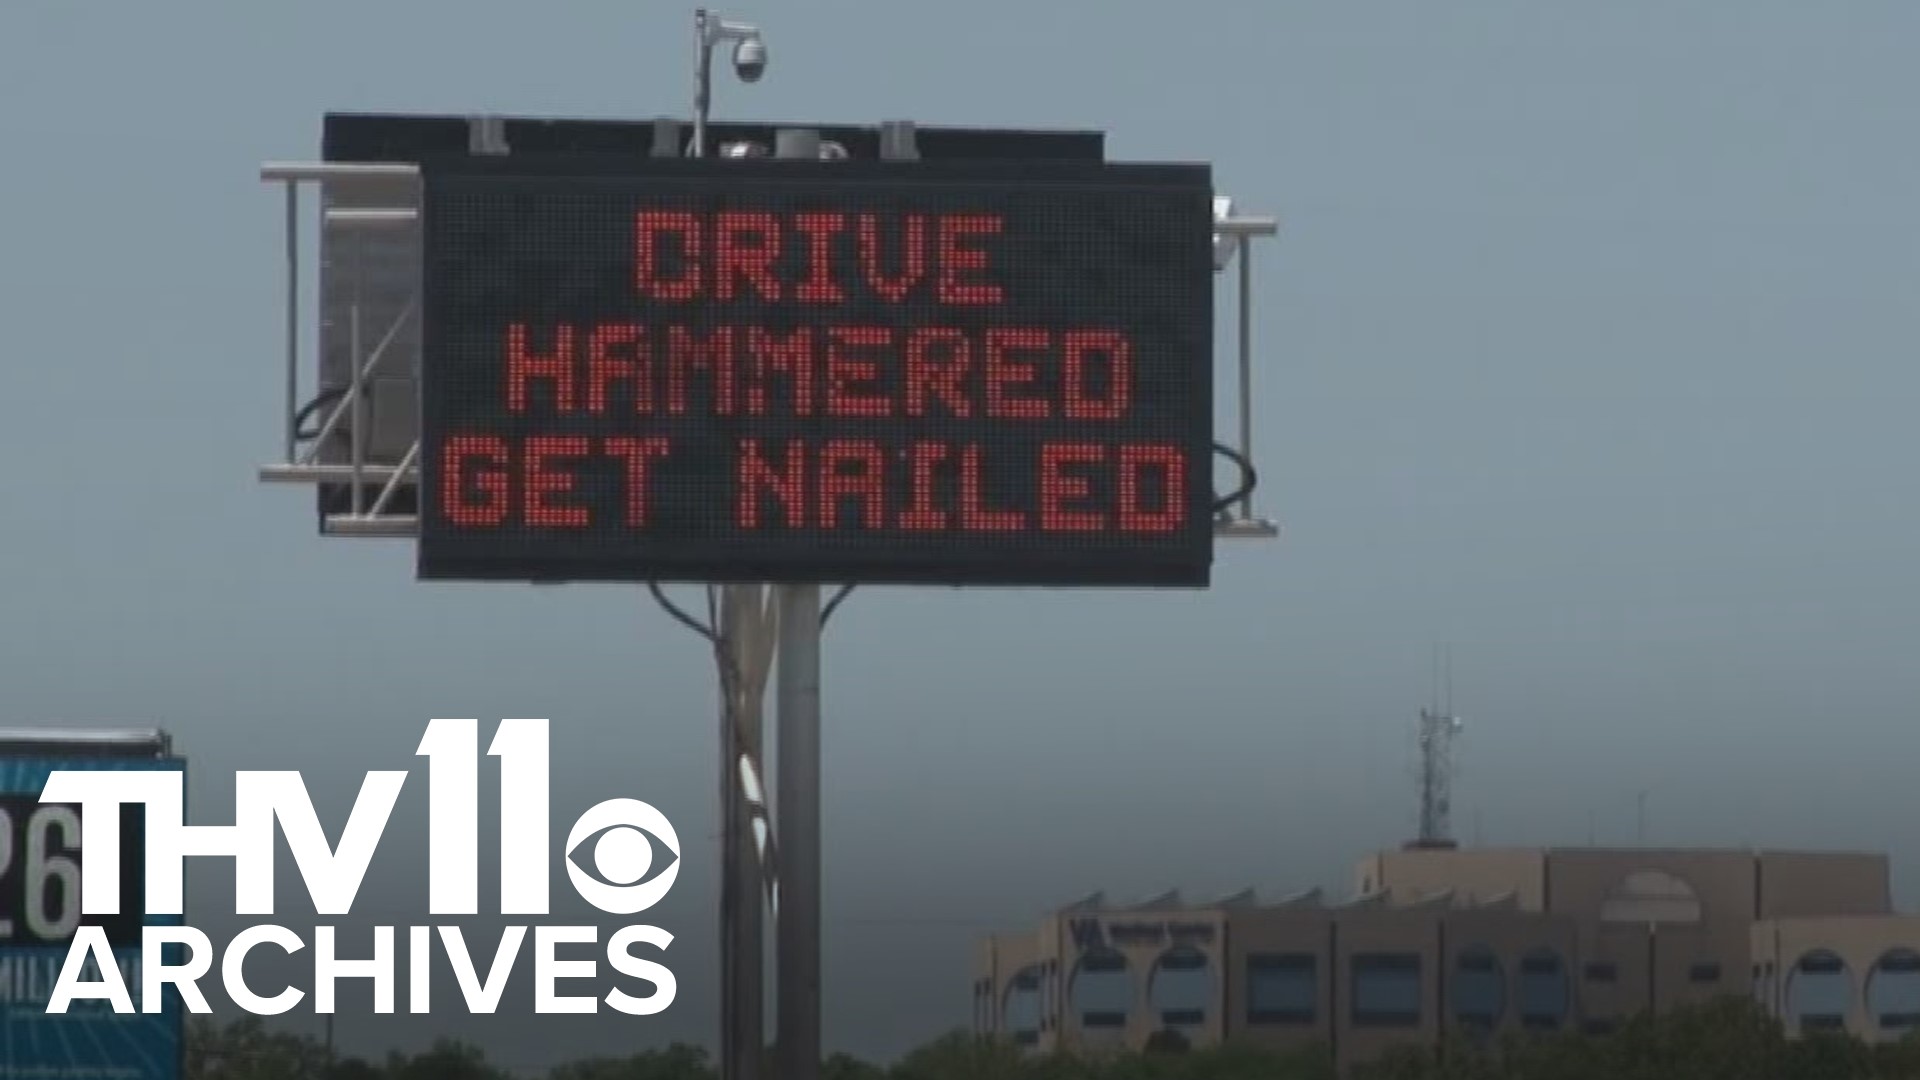 From the archives (2018): The Arkansas Department of Transportation worked on some comedy material on highways to promote safe driving.